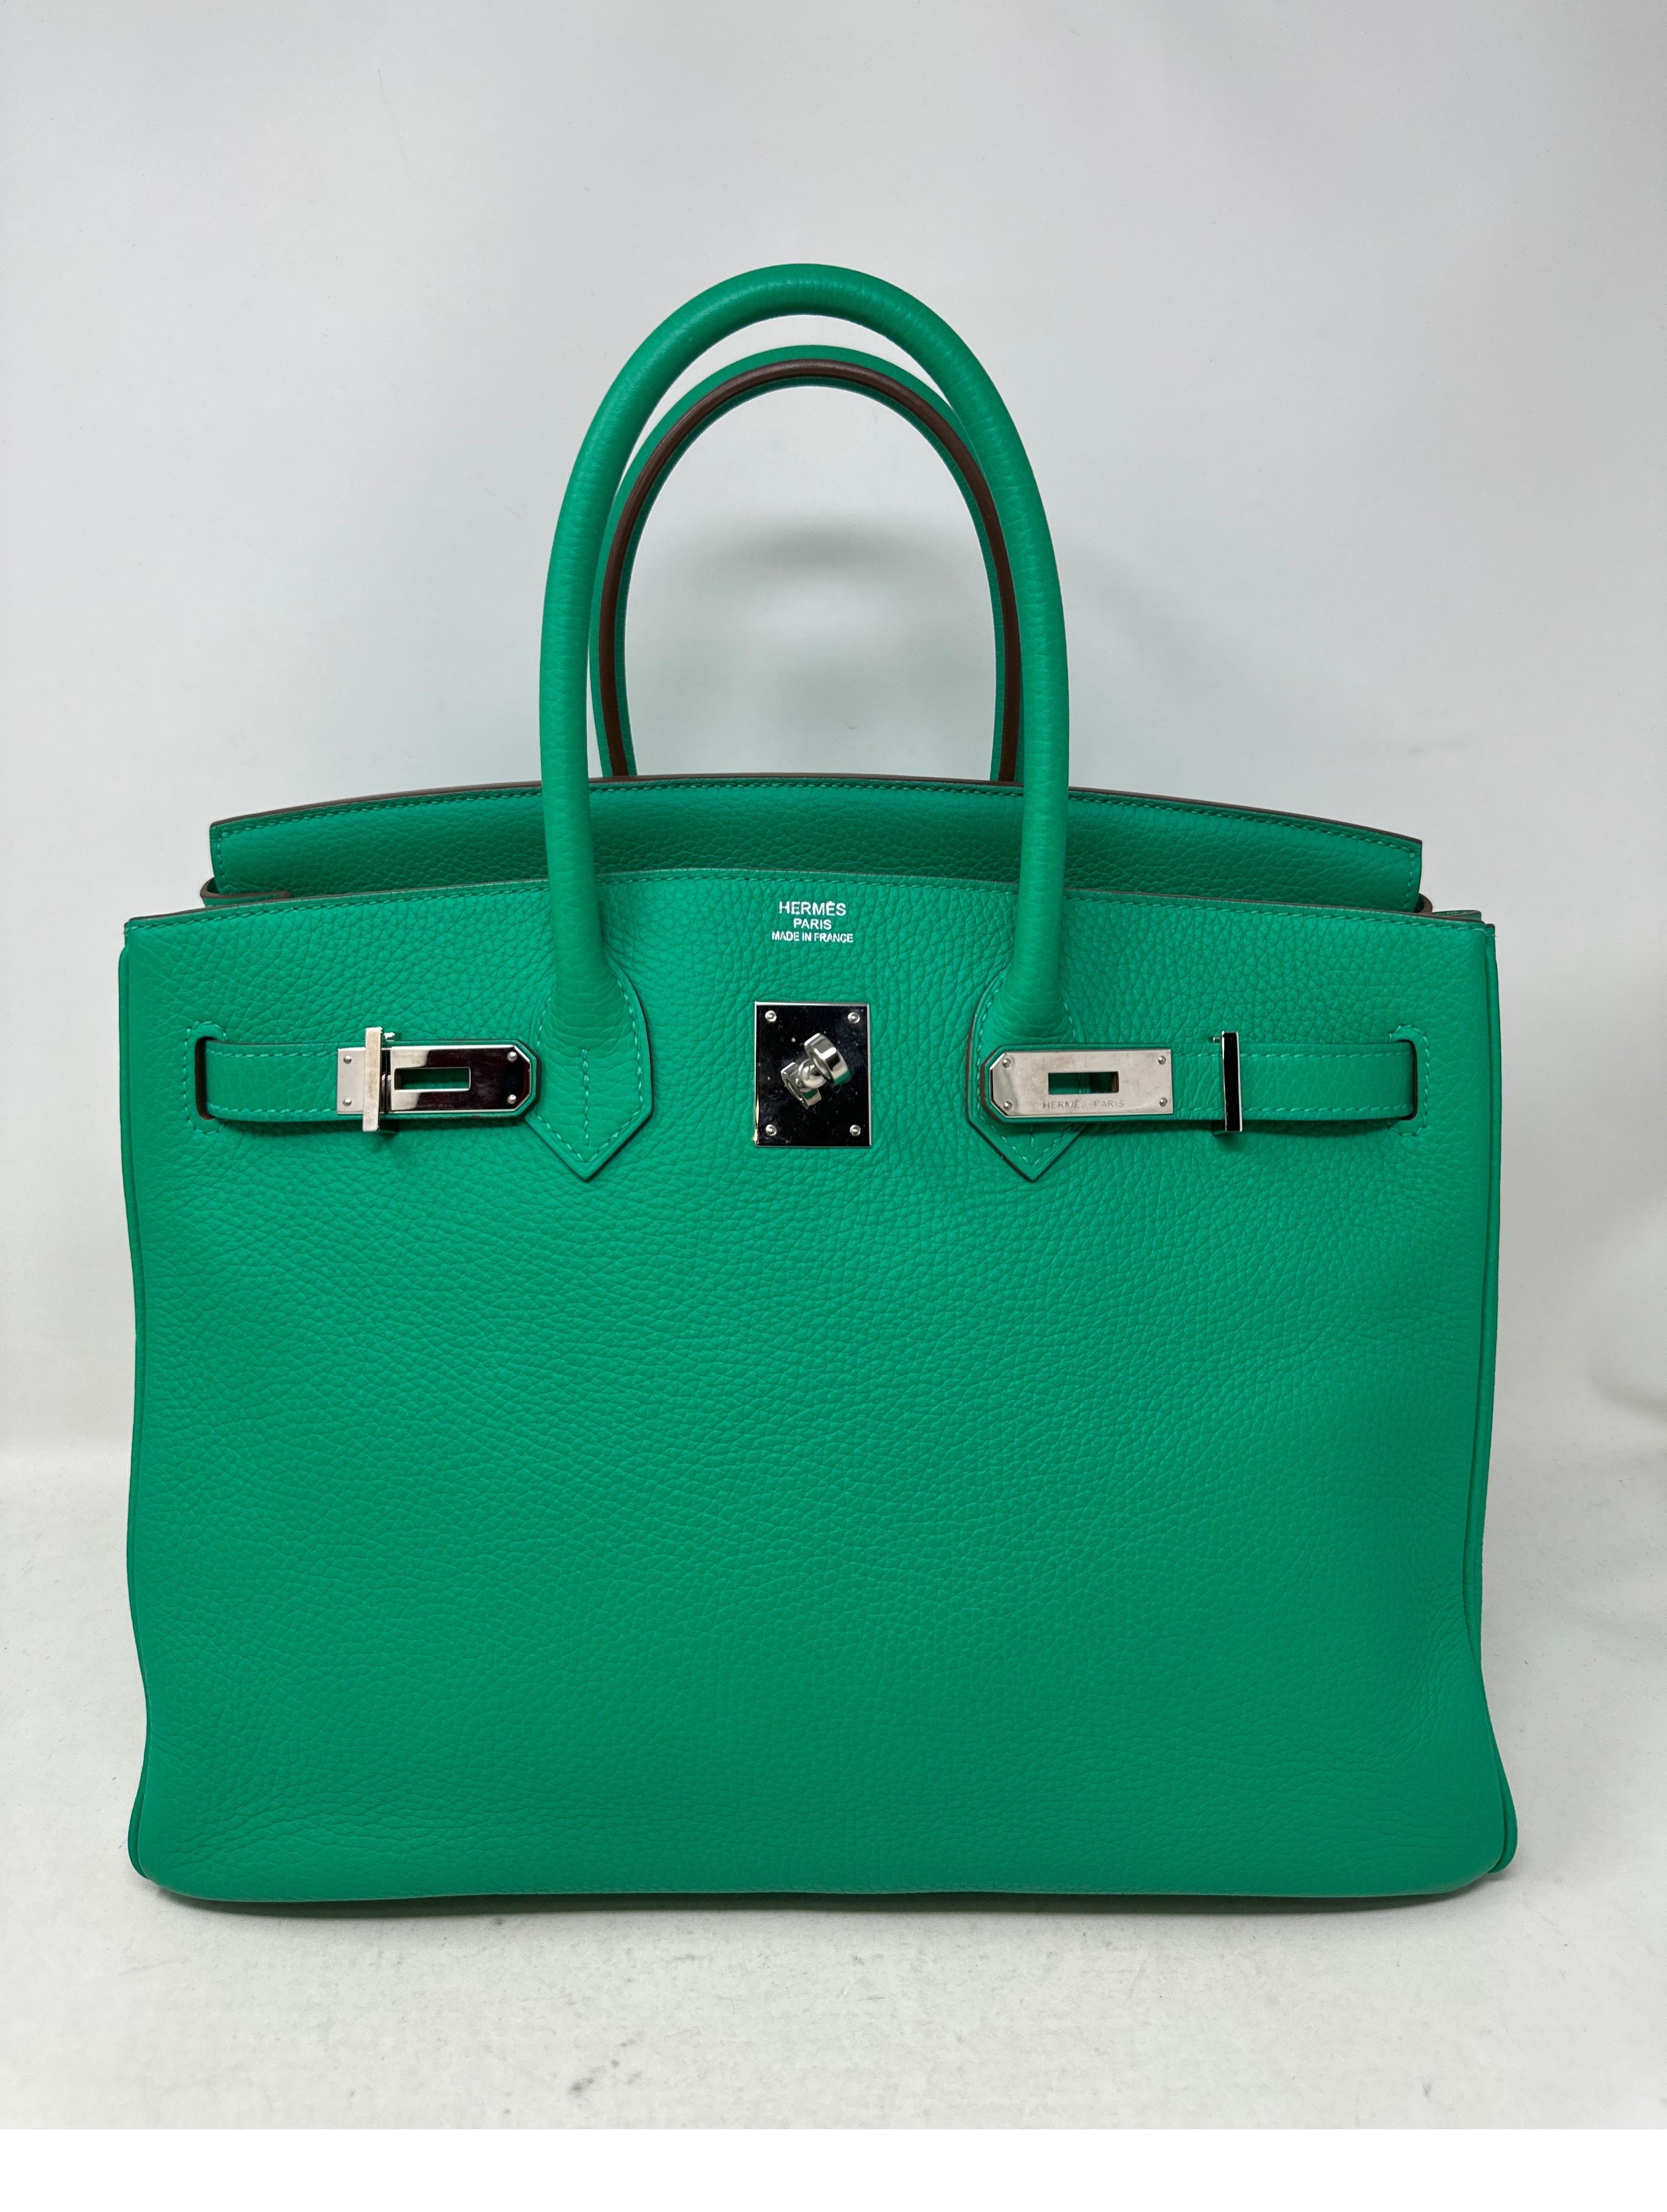 Hermes Menthe Green Birkin 35 Bag. Excellent condition. Clemence leather. Palladium silver hardware. Minty green color. Interior clean. Includes clcohette, lock, keys, and dust bag. Includes Bababebi authenticity certificate. Guaranteed authentic. 